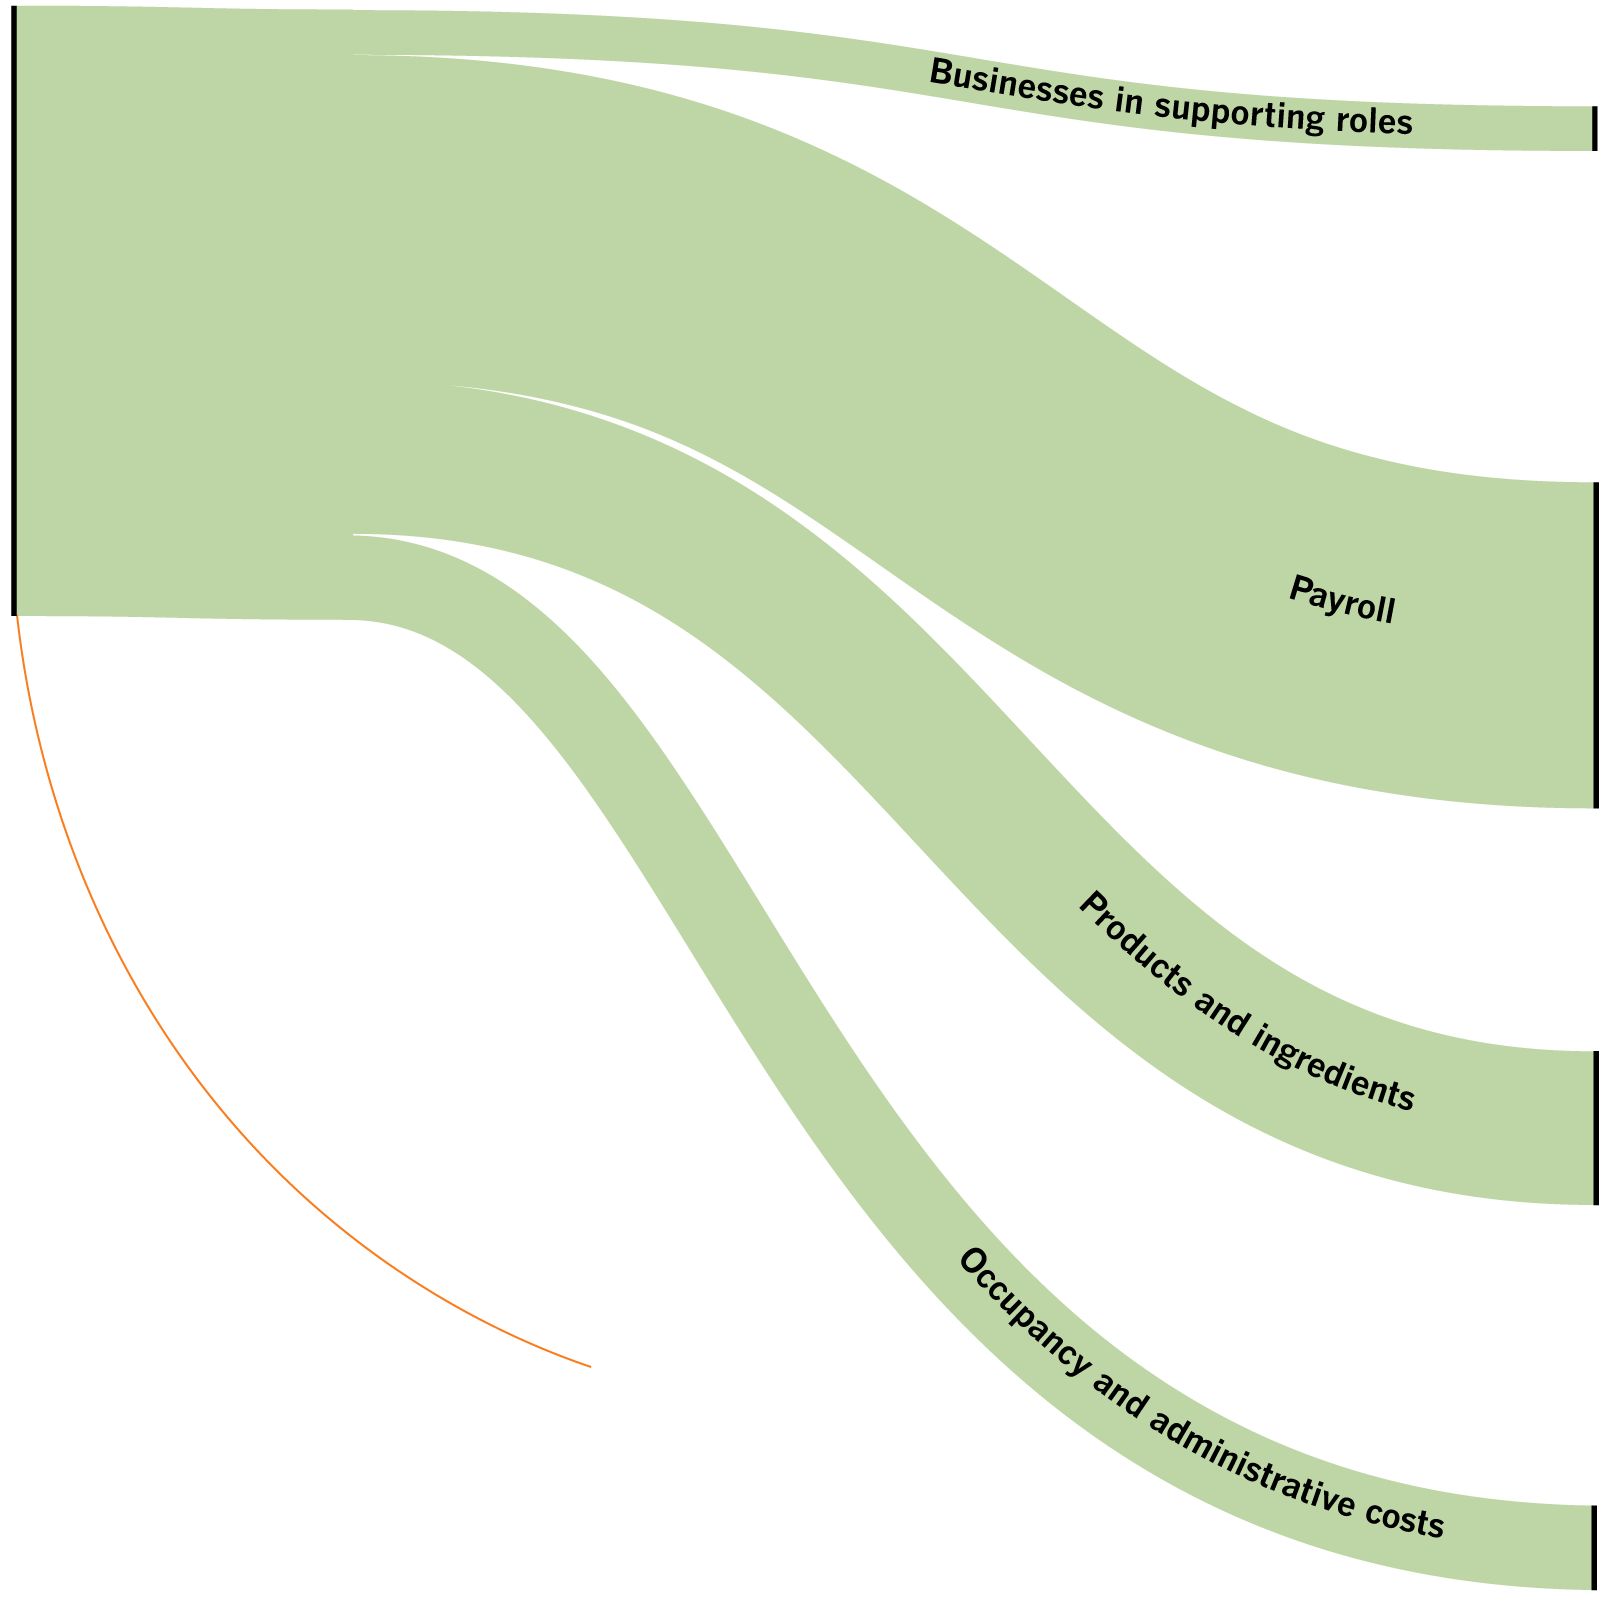 Sankey diagram showing how Botanica expenses are split with payroll being the highest